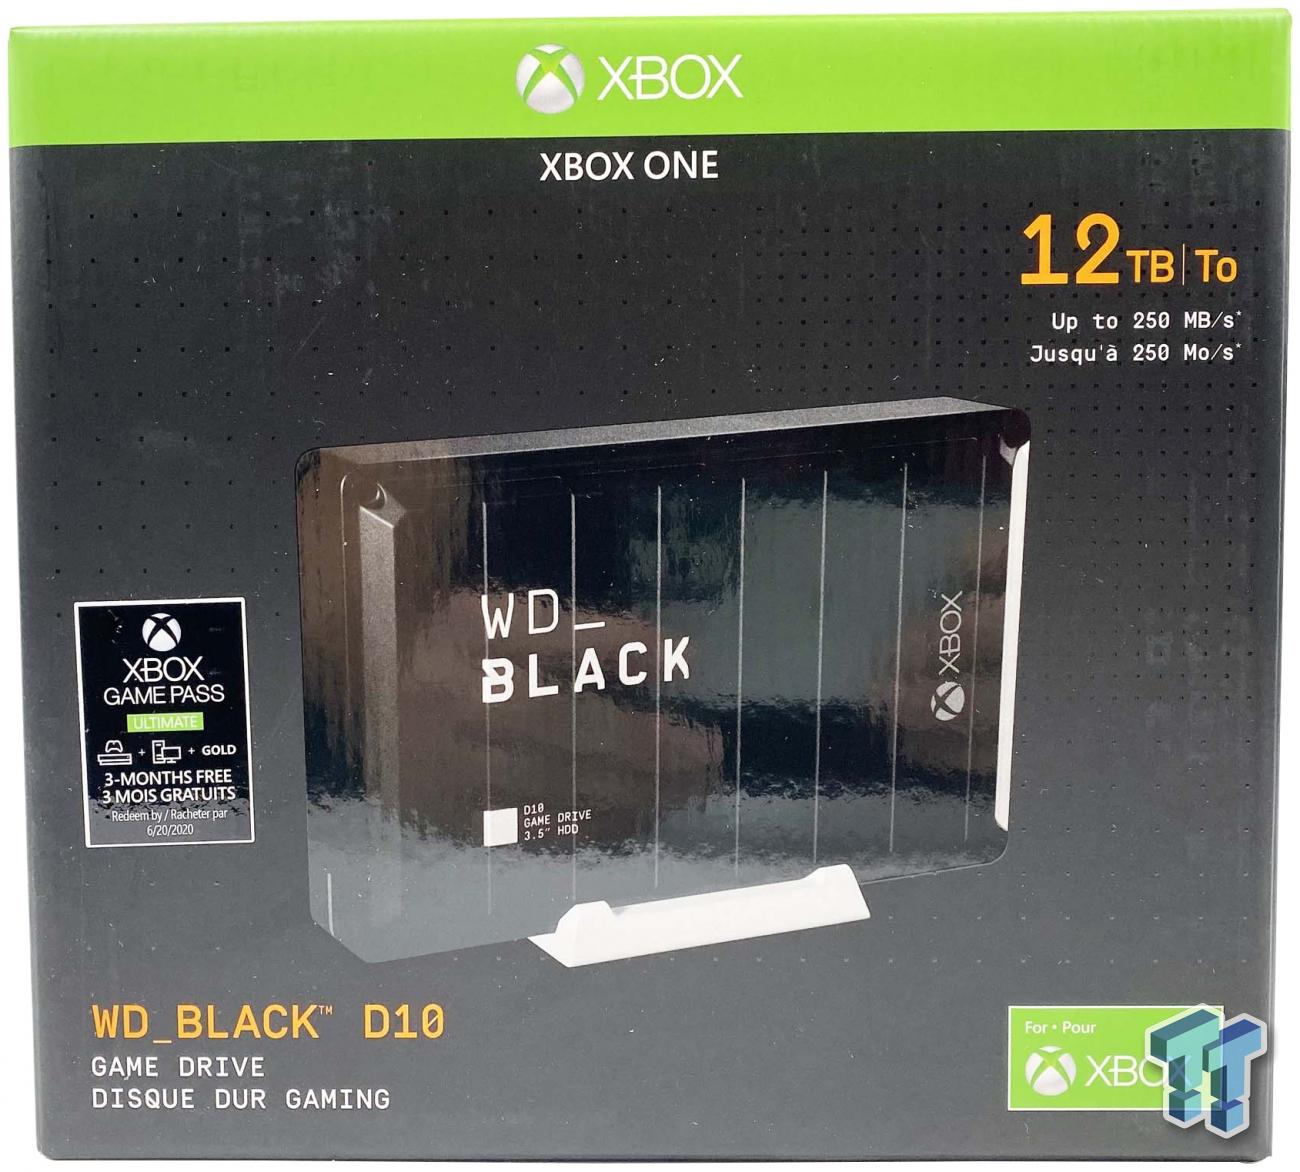 WD Black D10 Game Drive for Xbox 12TB Review